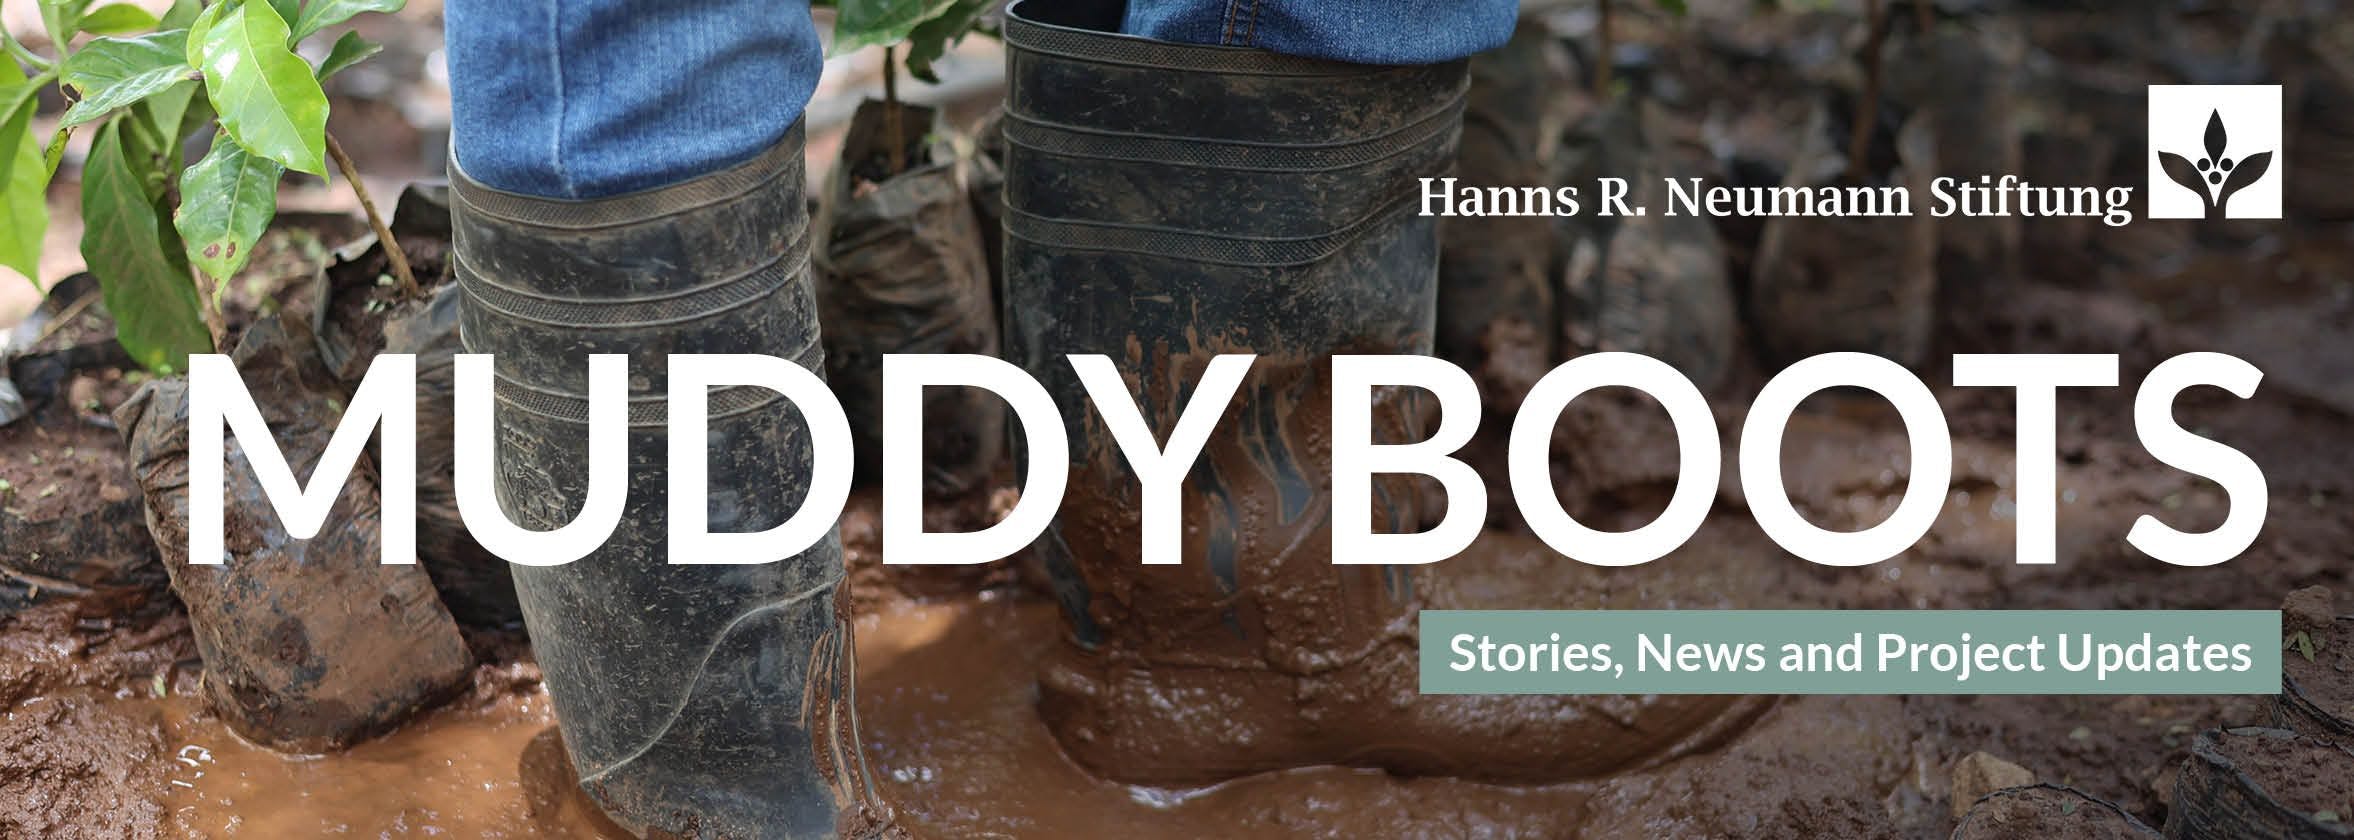 Subscribe to the Muddy Boots Newsletter